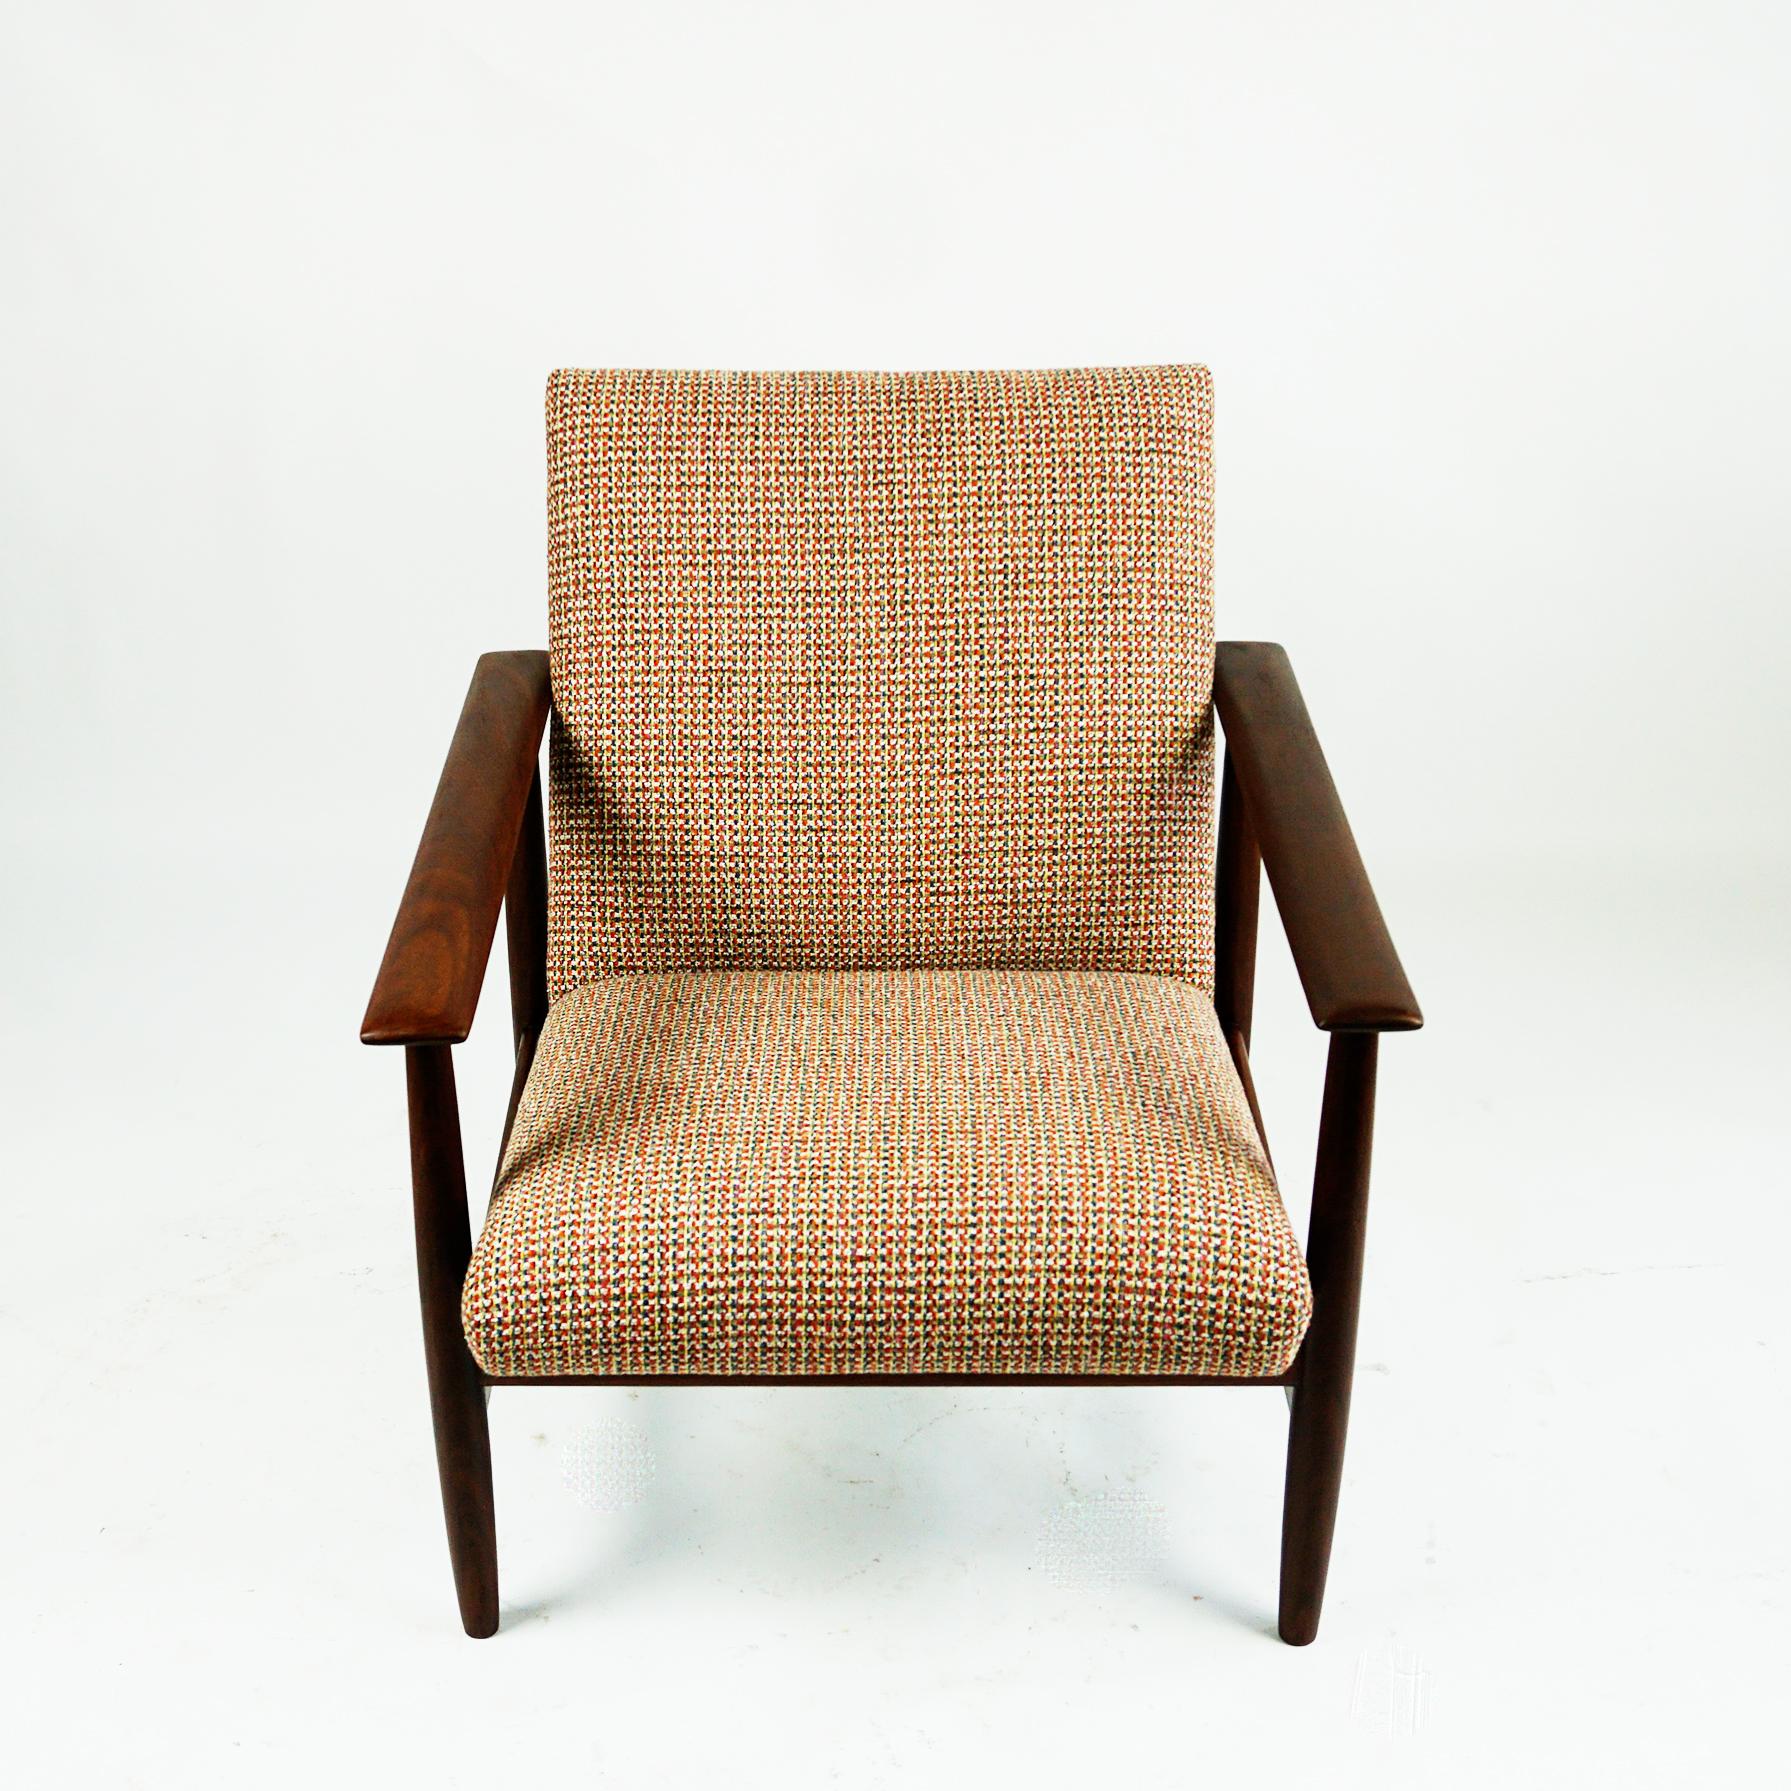 Scandinavian Modern Midcentury Mahogany and New Fabric Lounge Chair by Knoll Antimott, Germany